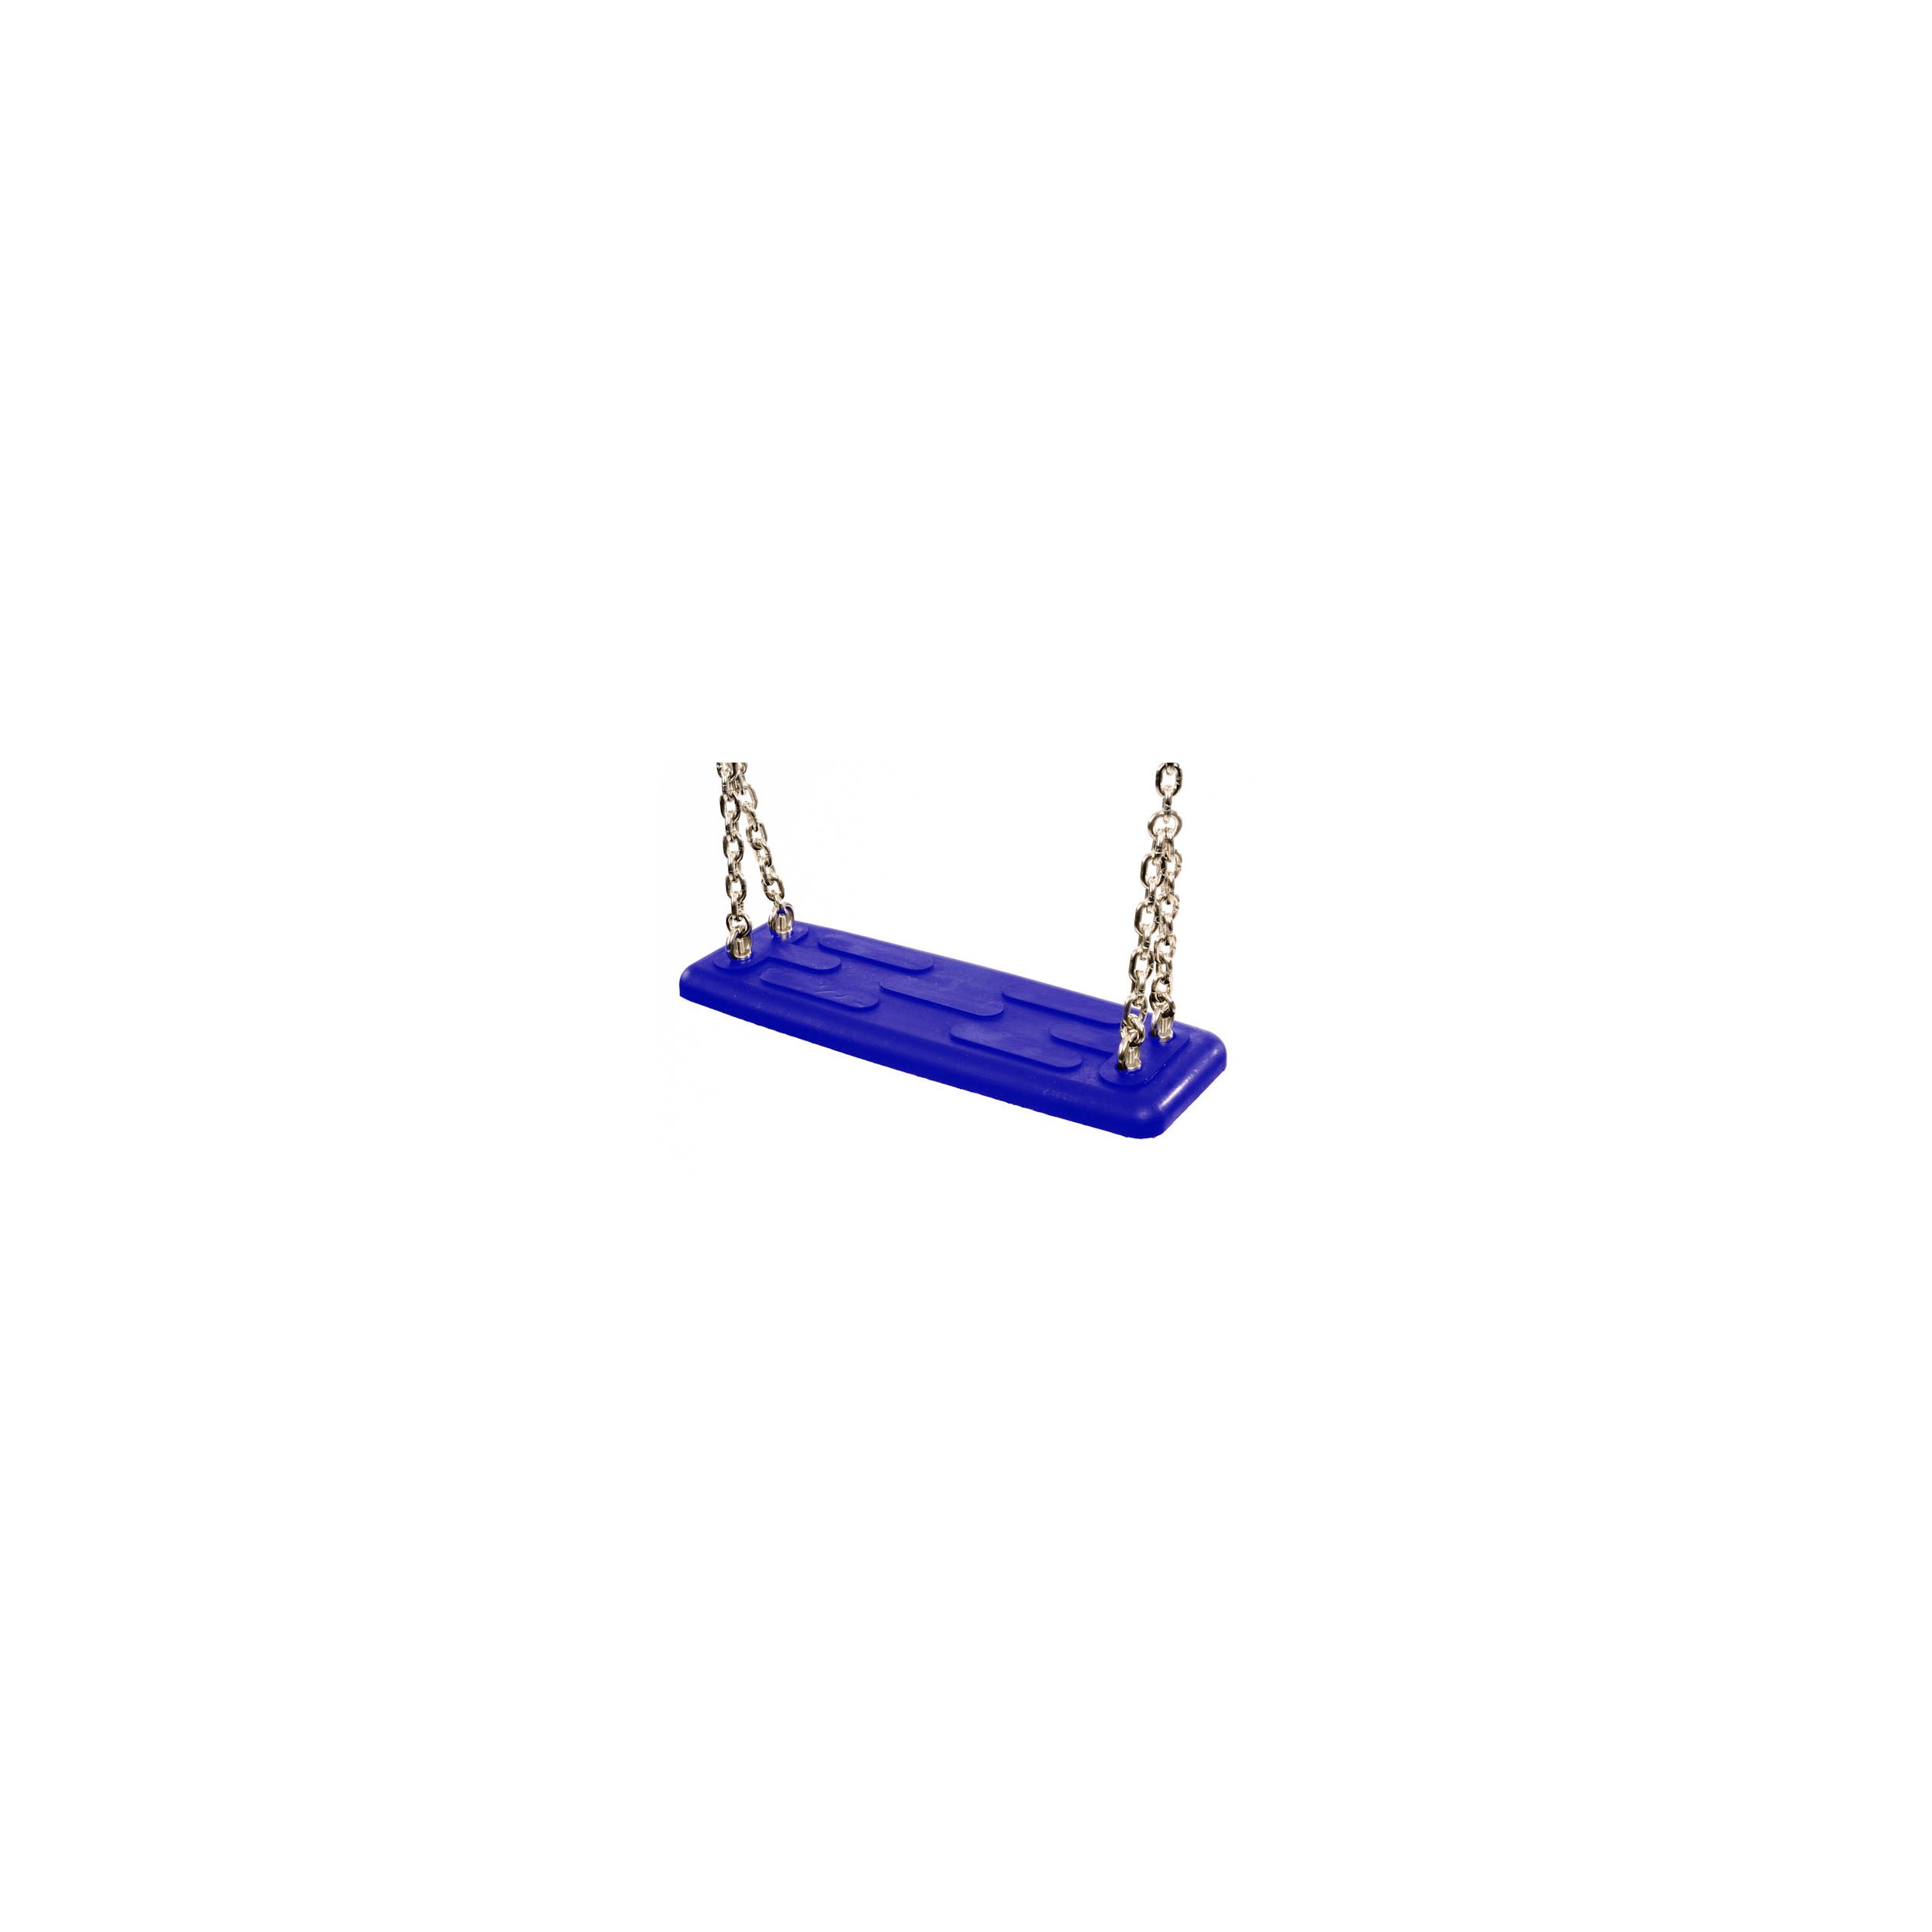 Commercial safety rubber swing seat type 1A blue stainless steel AISI 316 250 cm